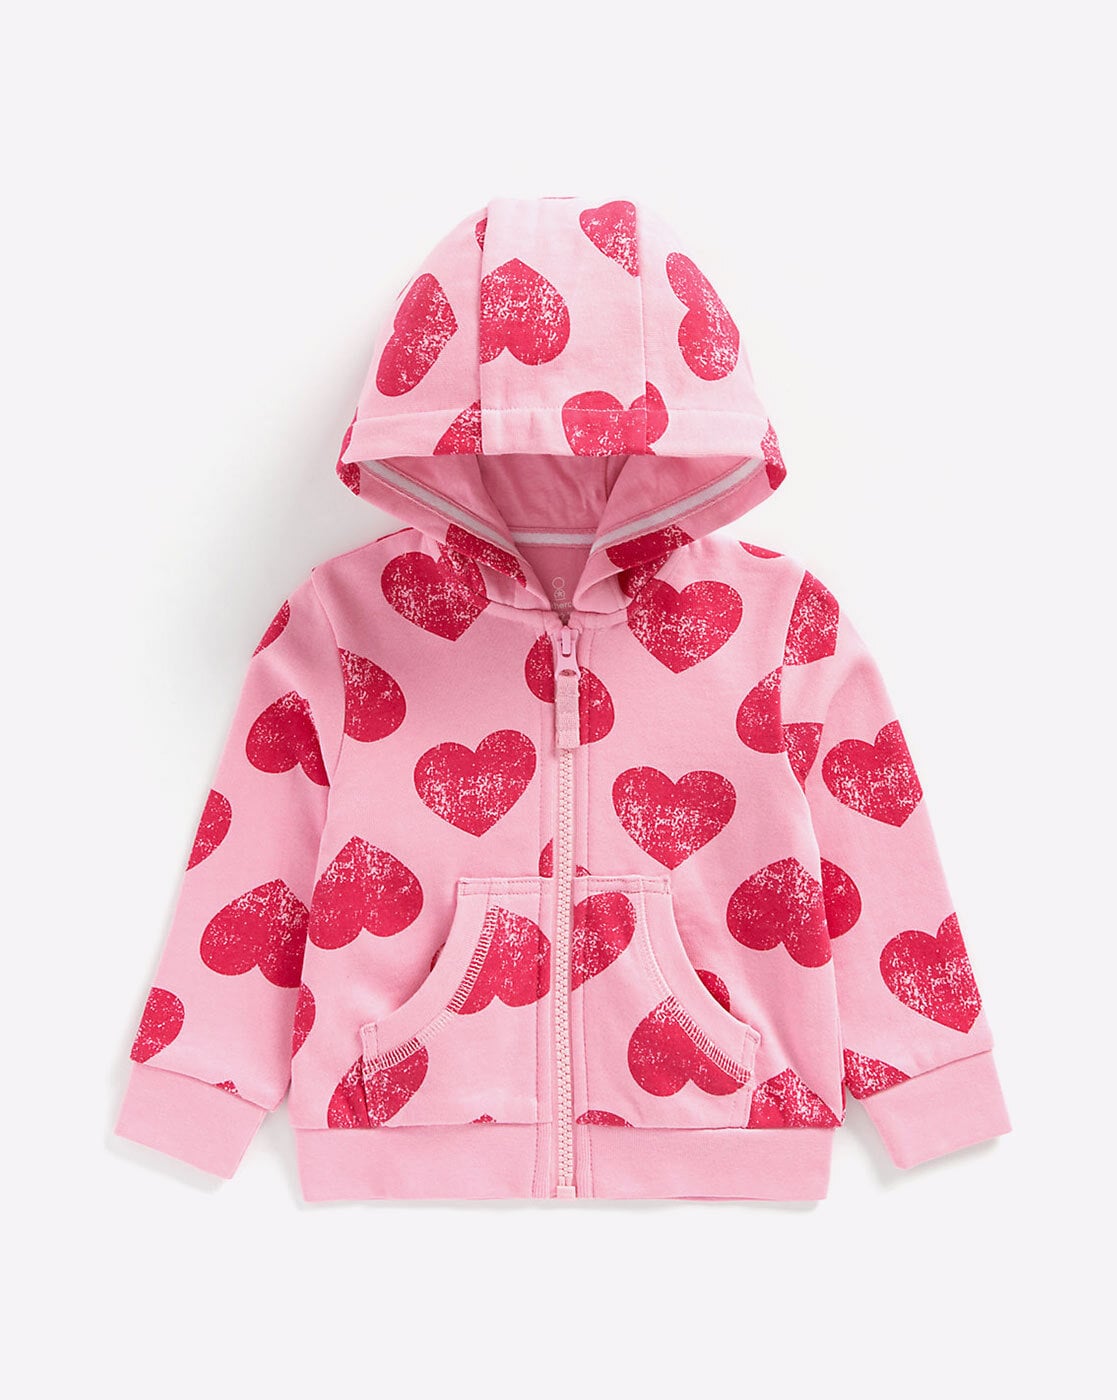 Princess Heart (pink and orange) Pullover Hoodie for Sale by gross-girl99